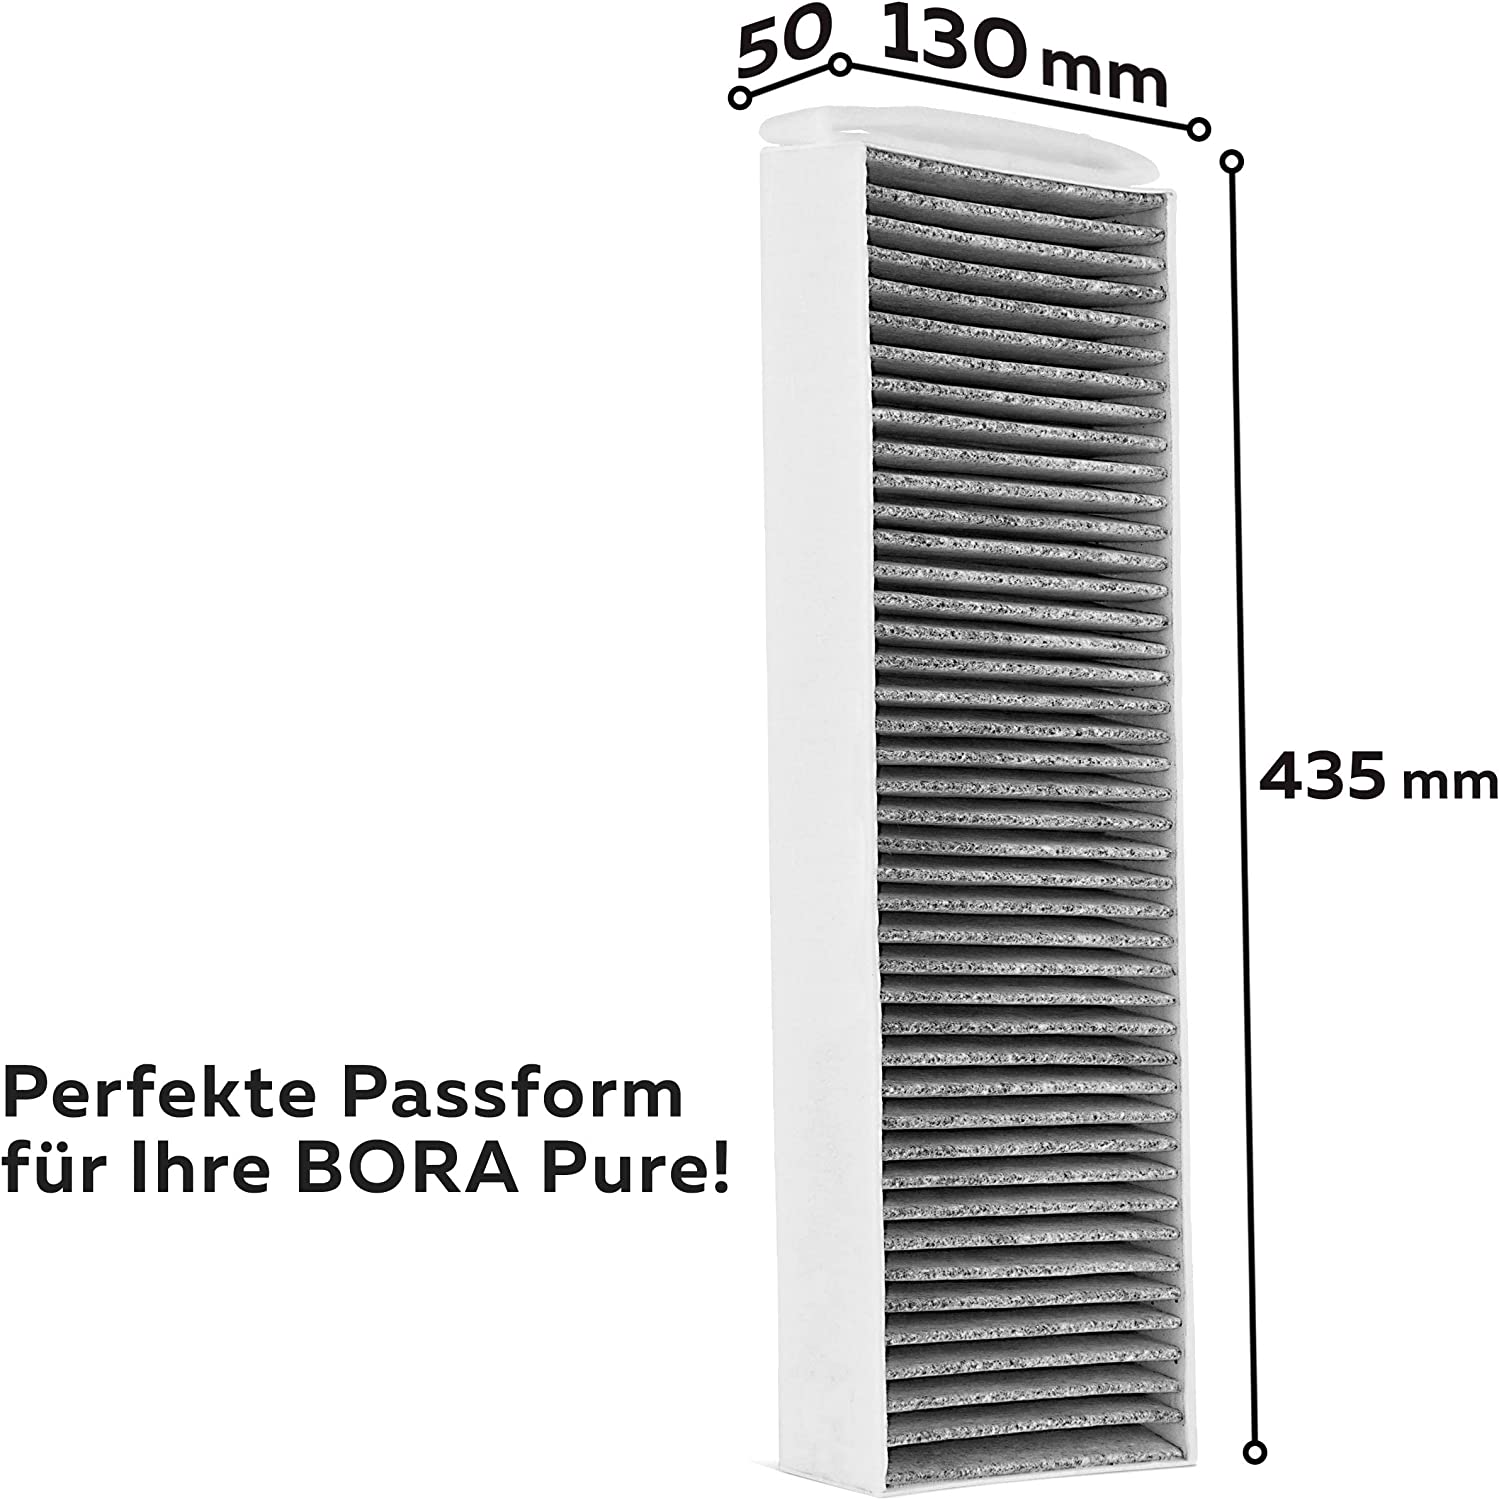 Activated Carbon Filter for Bora Pure Replace PUAKF (PURU / PUXU)